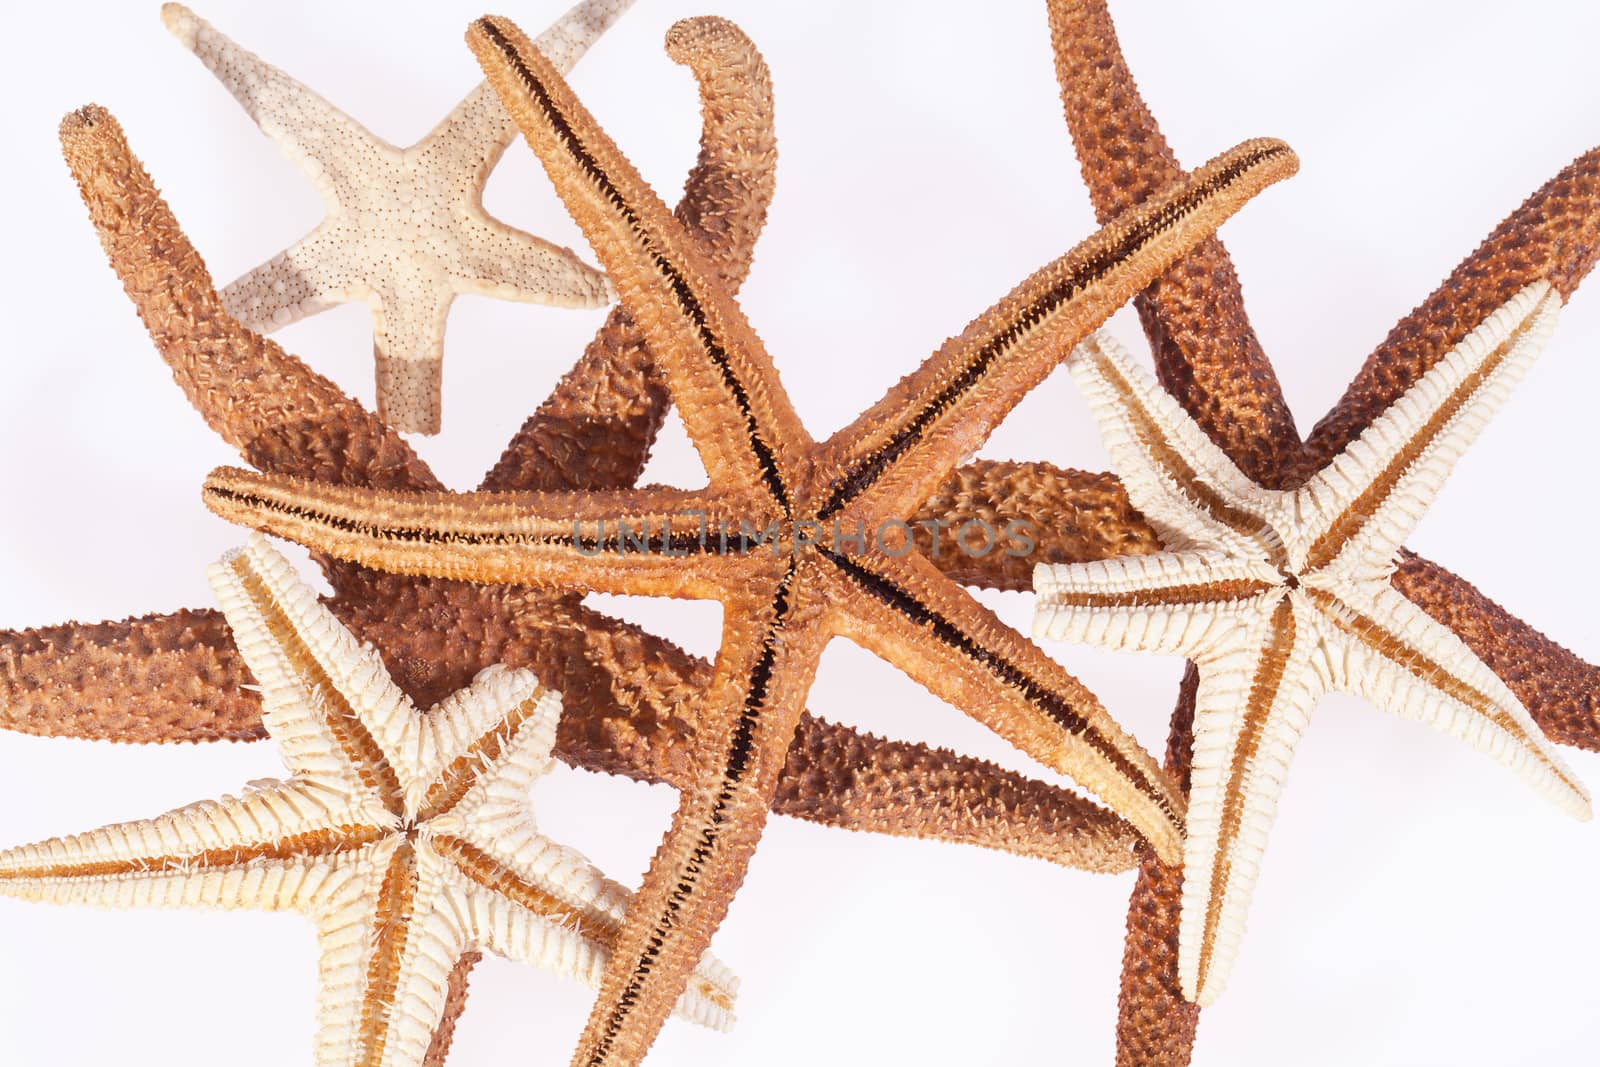 some starfishes on white background close up